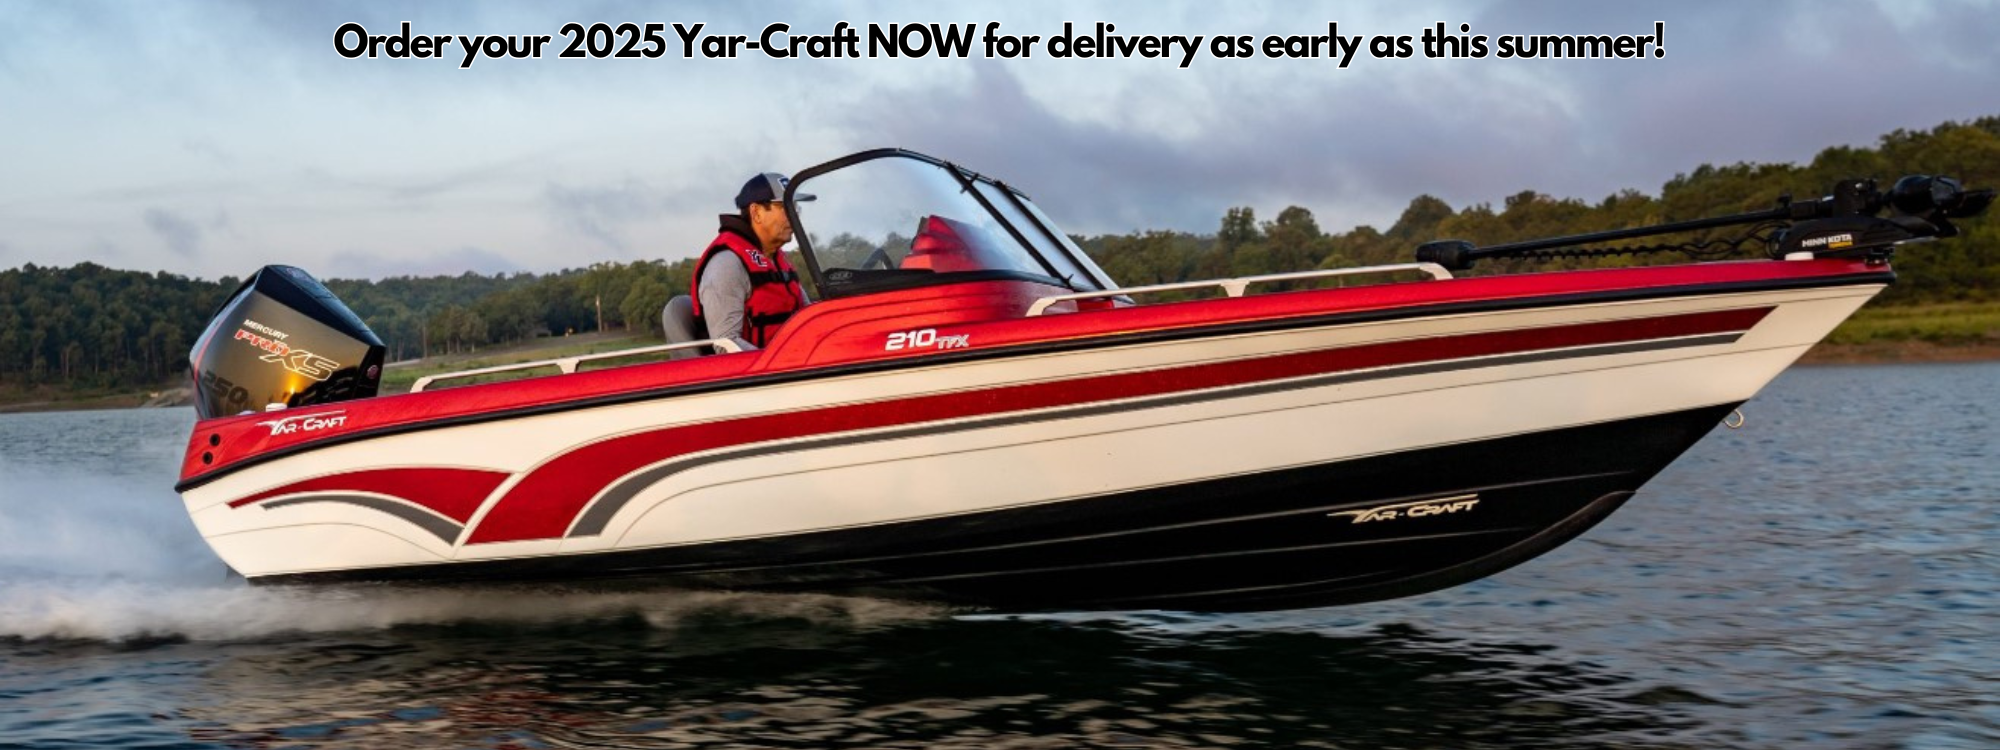 Order your 2025 Yar-Craft NOW for delivery as early as this summer!